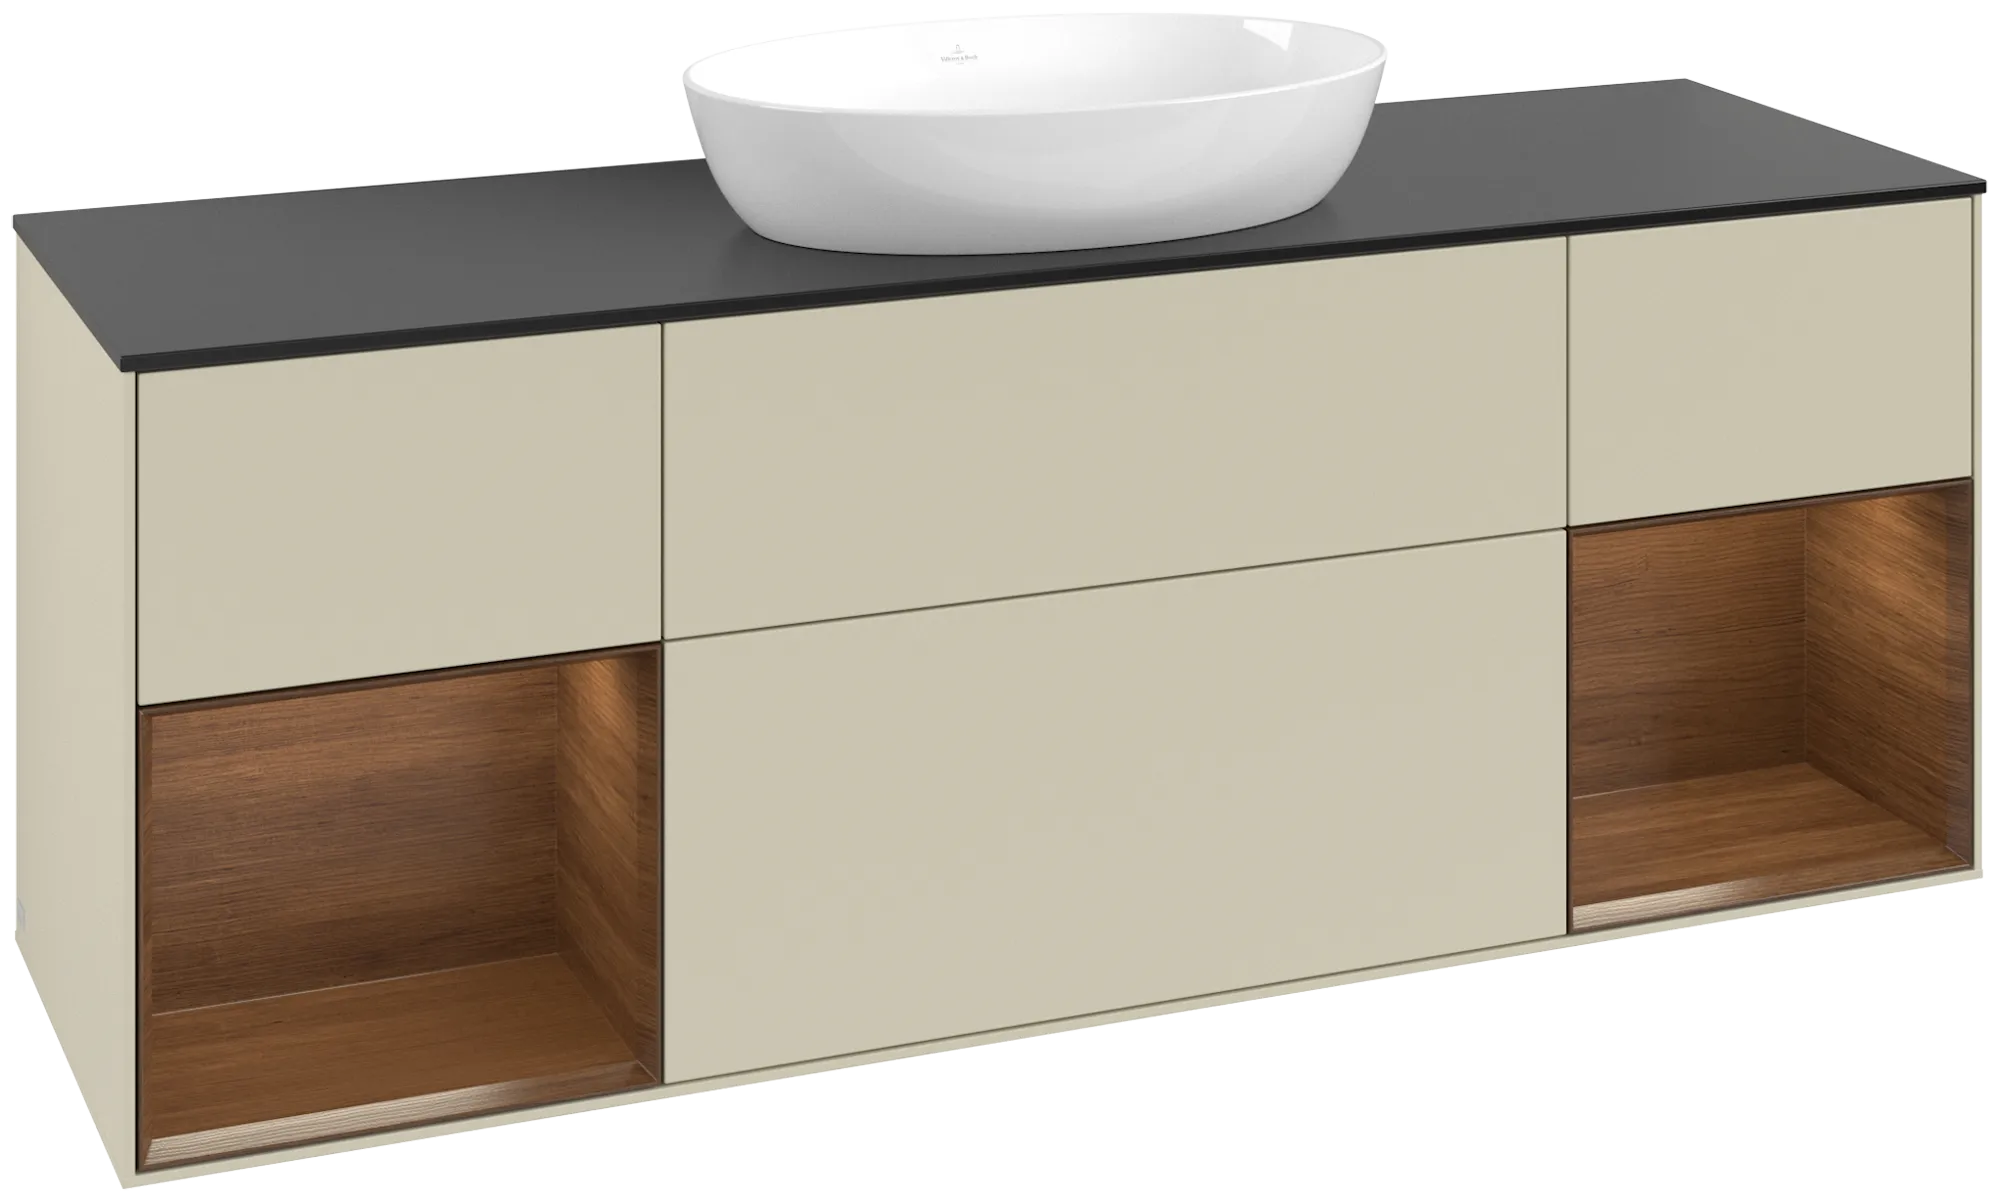 Picture of VILLEROY BOCH Finion Vanity unit, with lighting, 4 pull-out compartments, 1600 x 603 x 501 mm, Silk Grey Matt Lacquer / Walnut Veneer / Glass Black Matt #GD02GNHJ